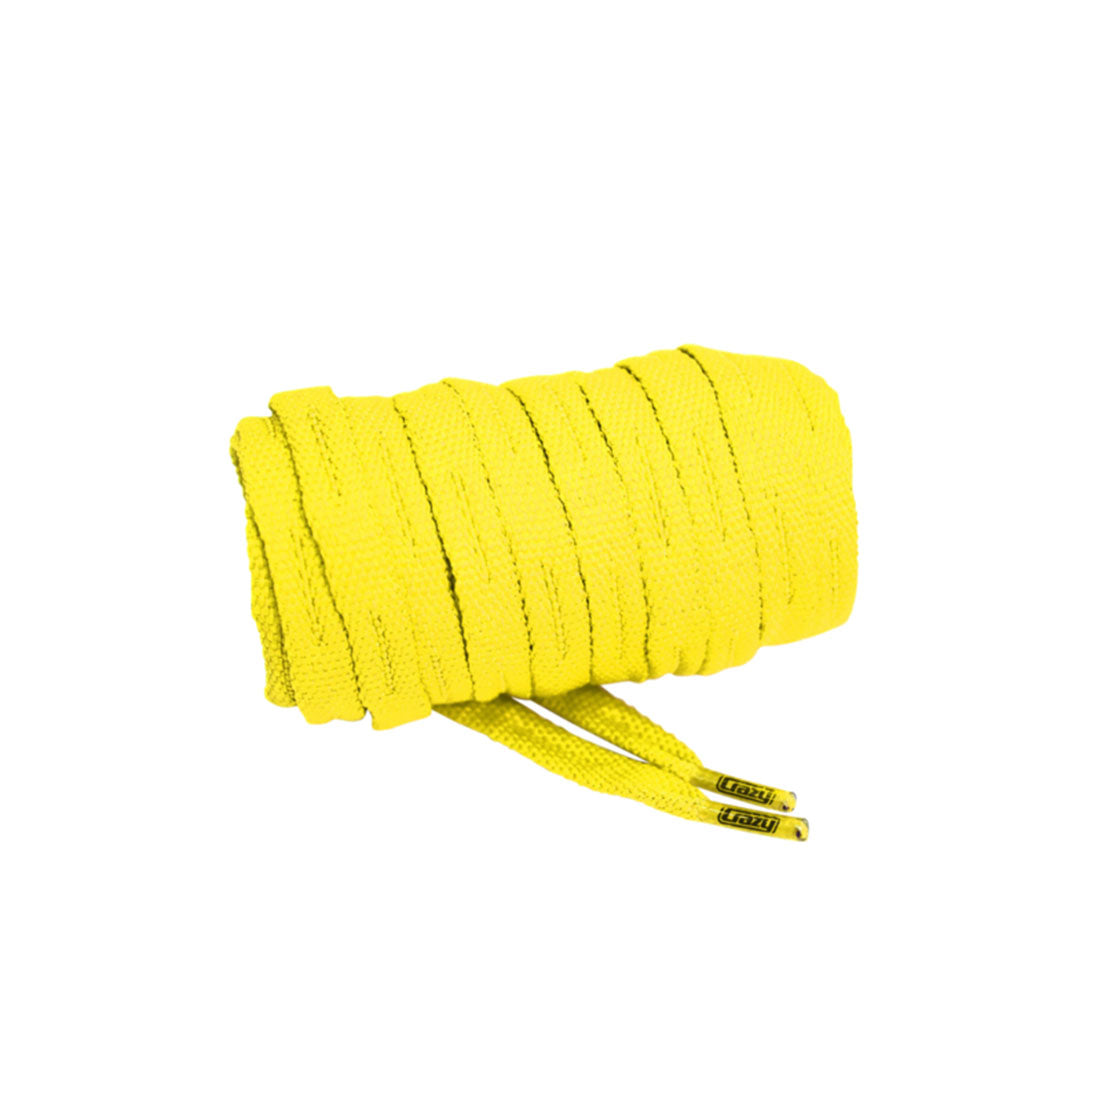 Crazy Laces - Pair - Assorted Colours Yellow Laces